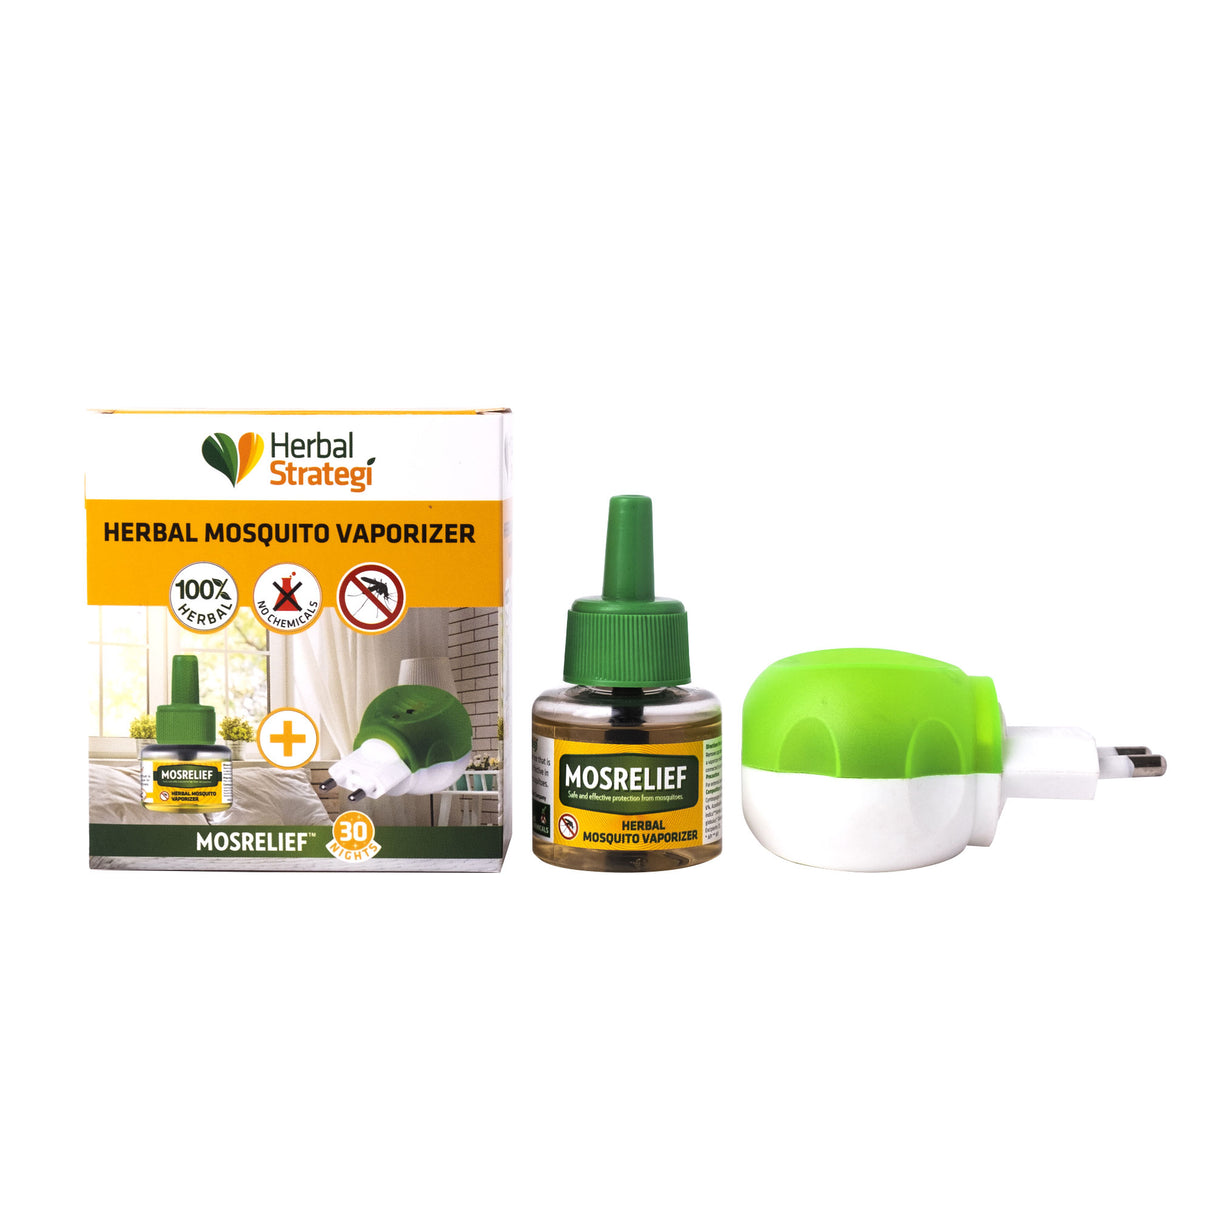 Herbal Mosquito Repellent Vaporizer | Pack Size: 40 ml